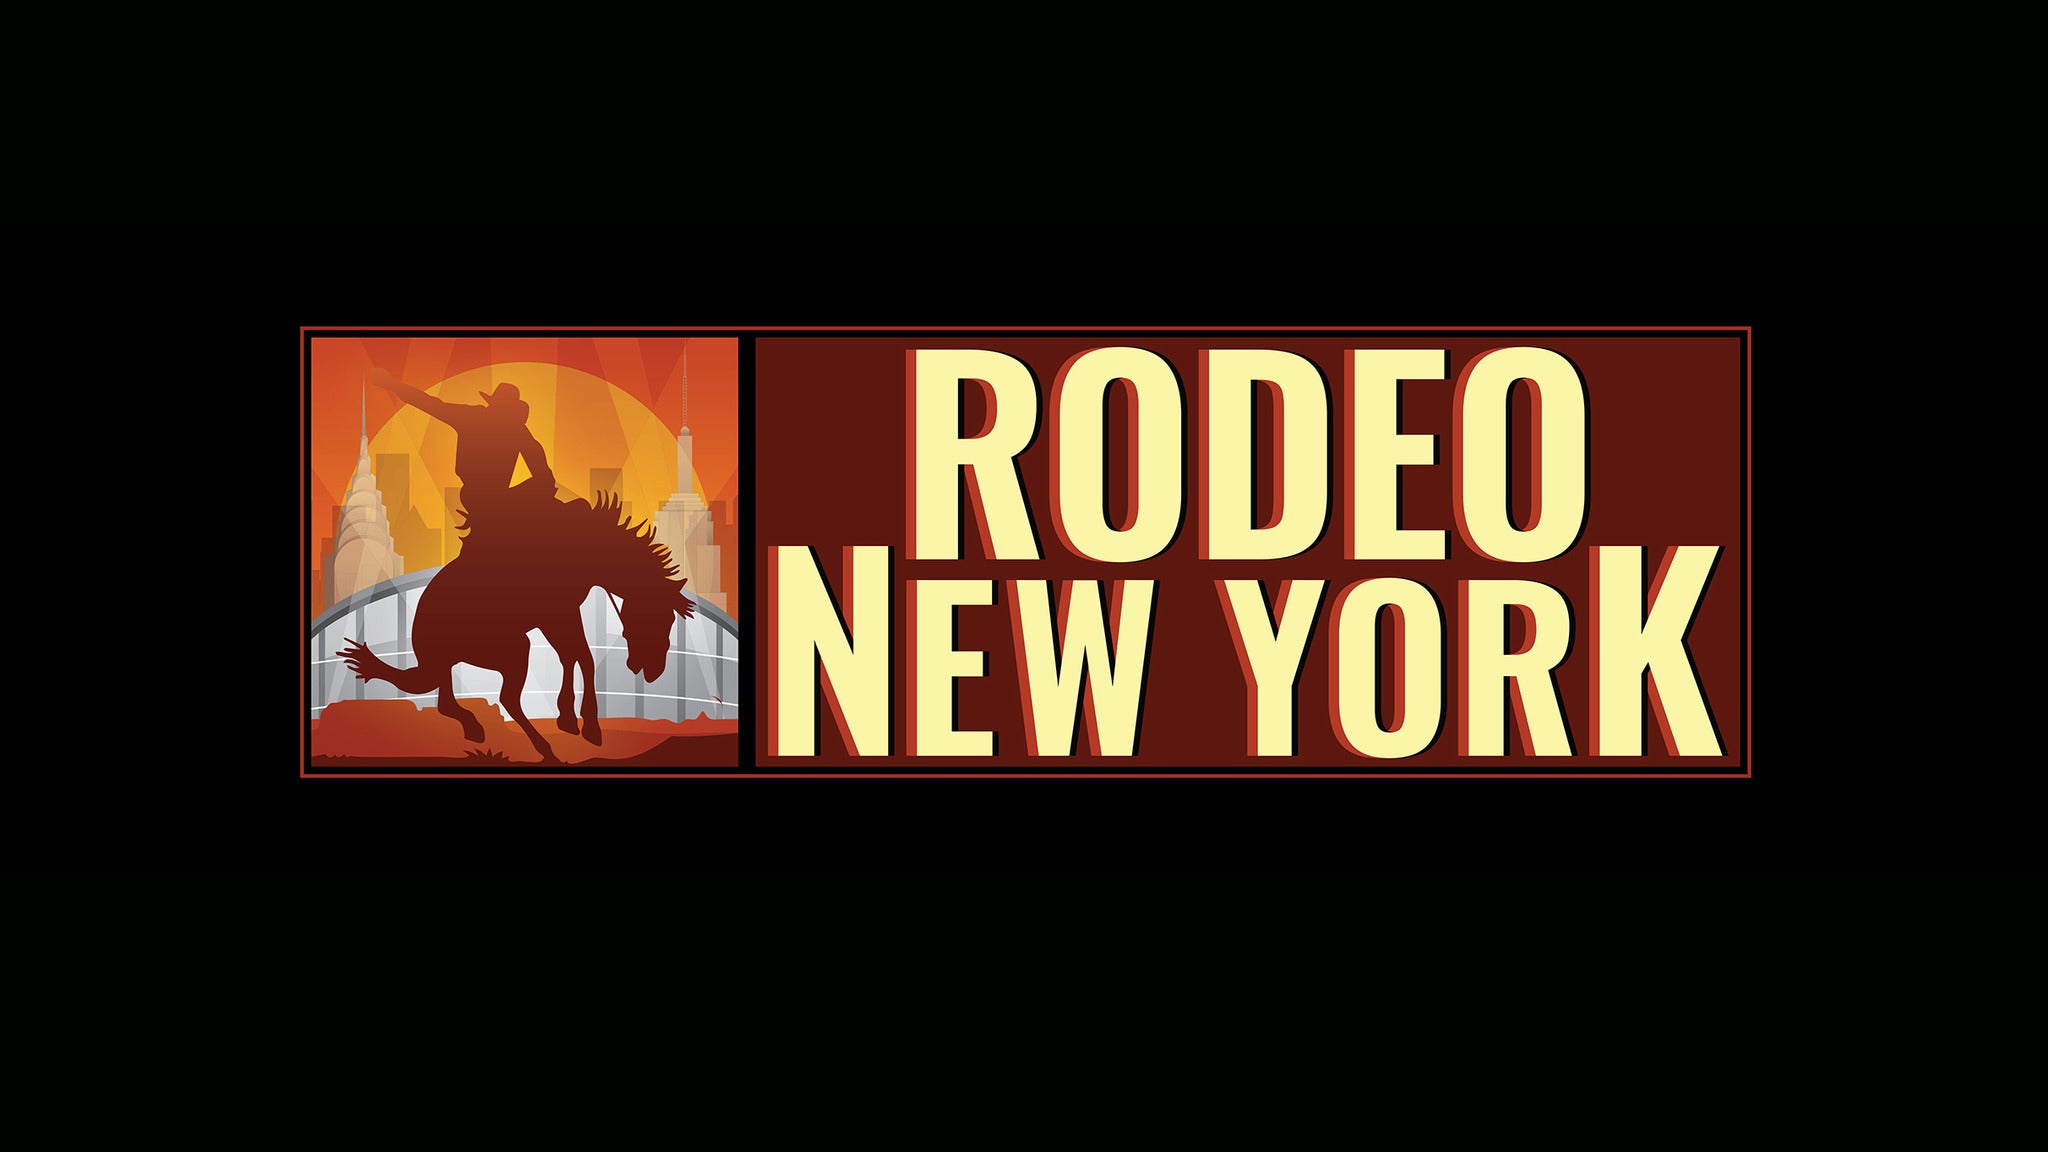 THE COWBOY CHANNEL presents "RODEO NEW YORK" in New York promo photo for Official Platinum presale offer code